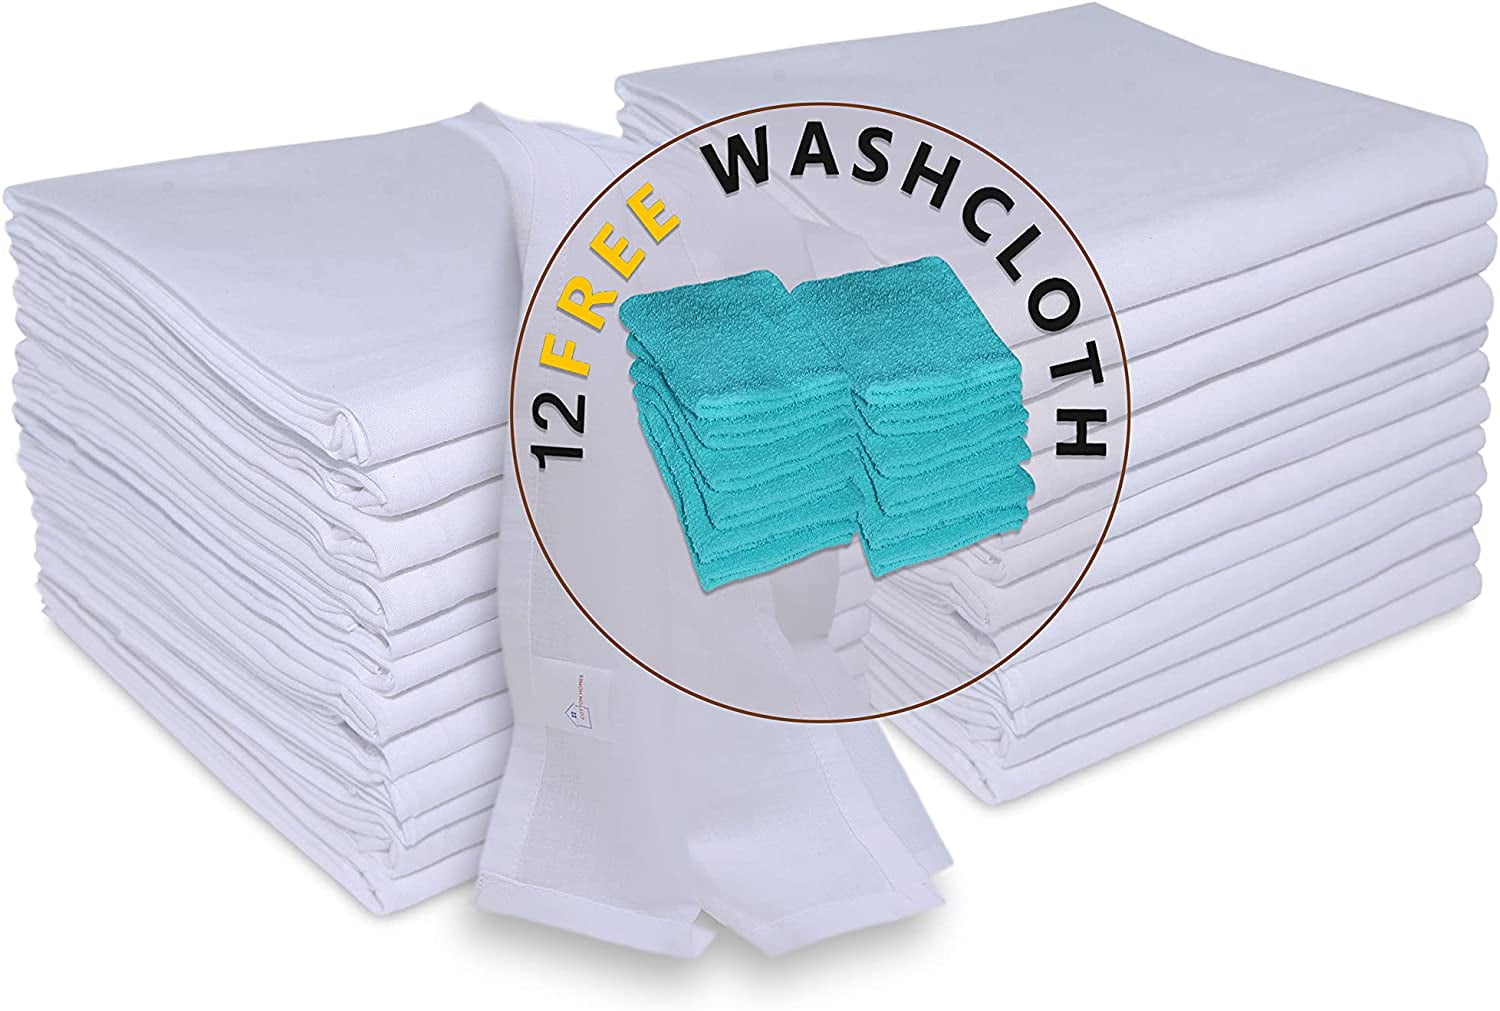 CANNON 100% Cotton Flour Sack Kitchen Towels (20 L x 30 W) for Home &  Commercial Use, Highly Durable, Super Soft, Low Lint and Easy to Wash  (4-Pack, White) 